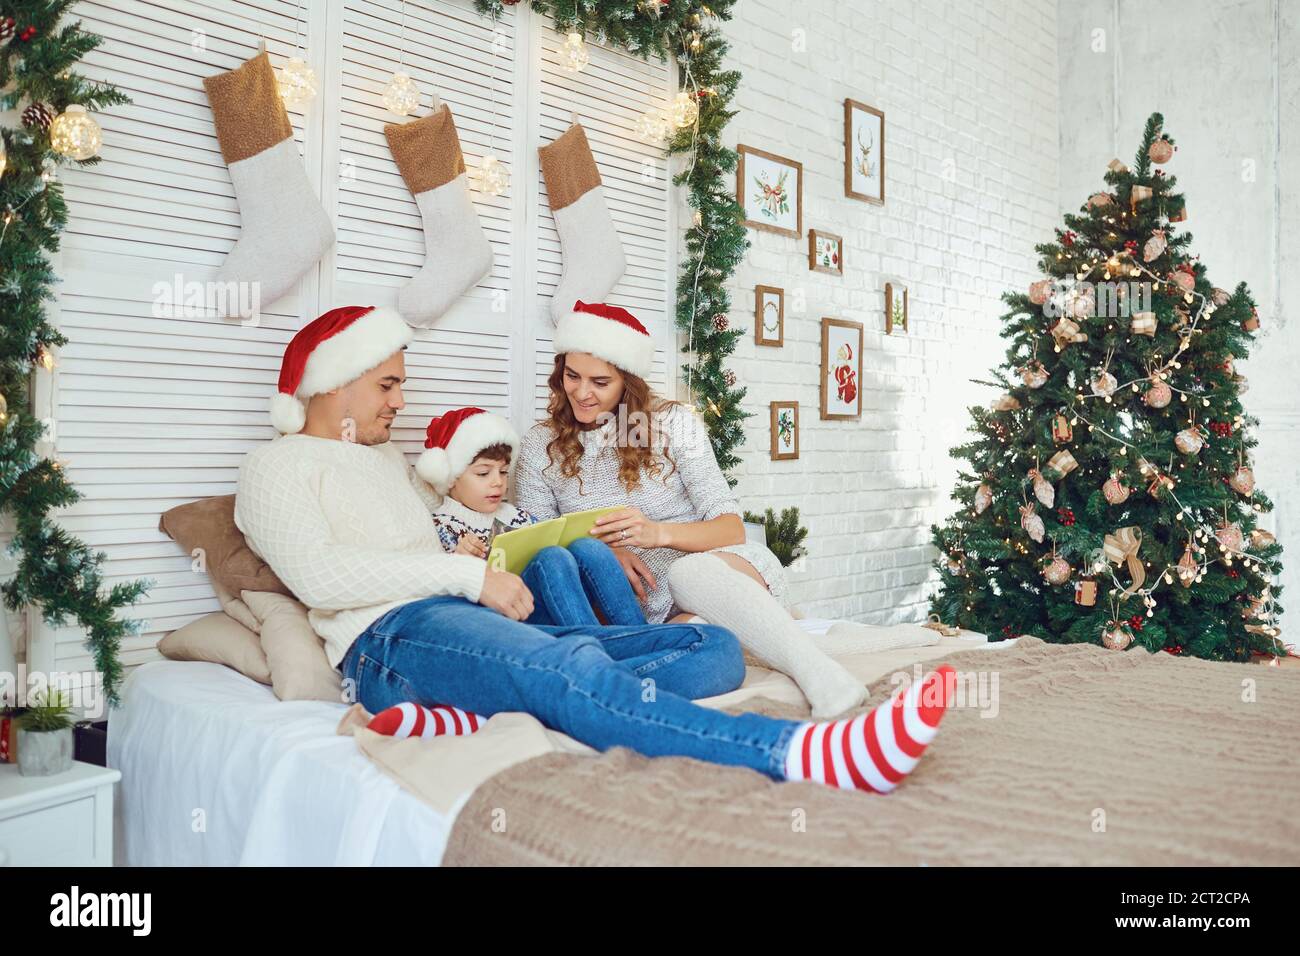 Family reading a bookin a house with a Christmas tree. Stock Photo